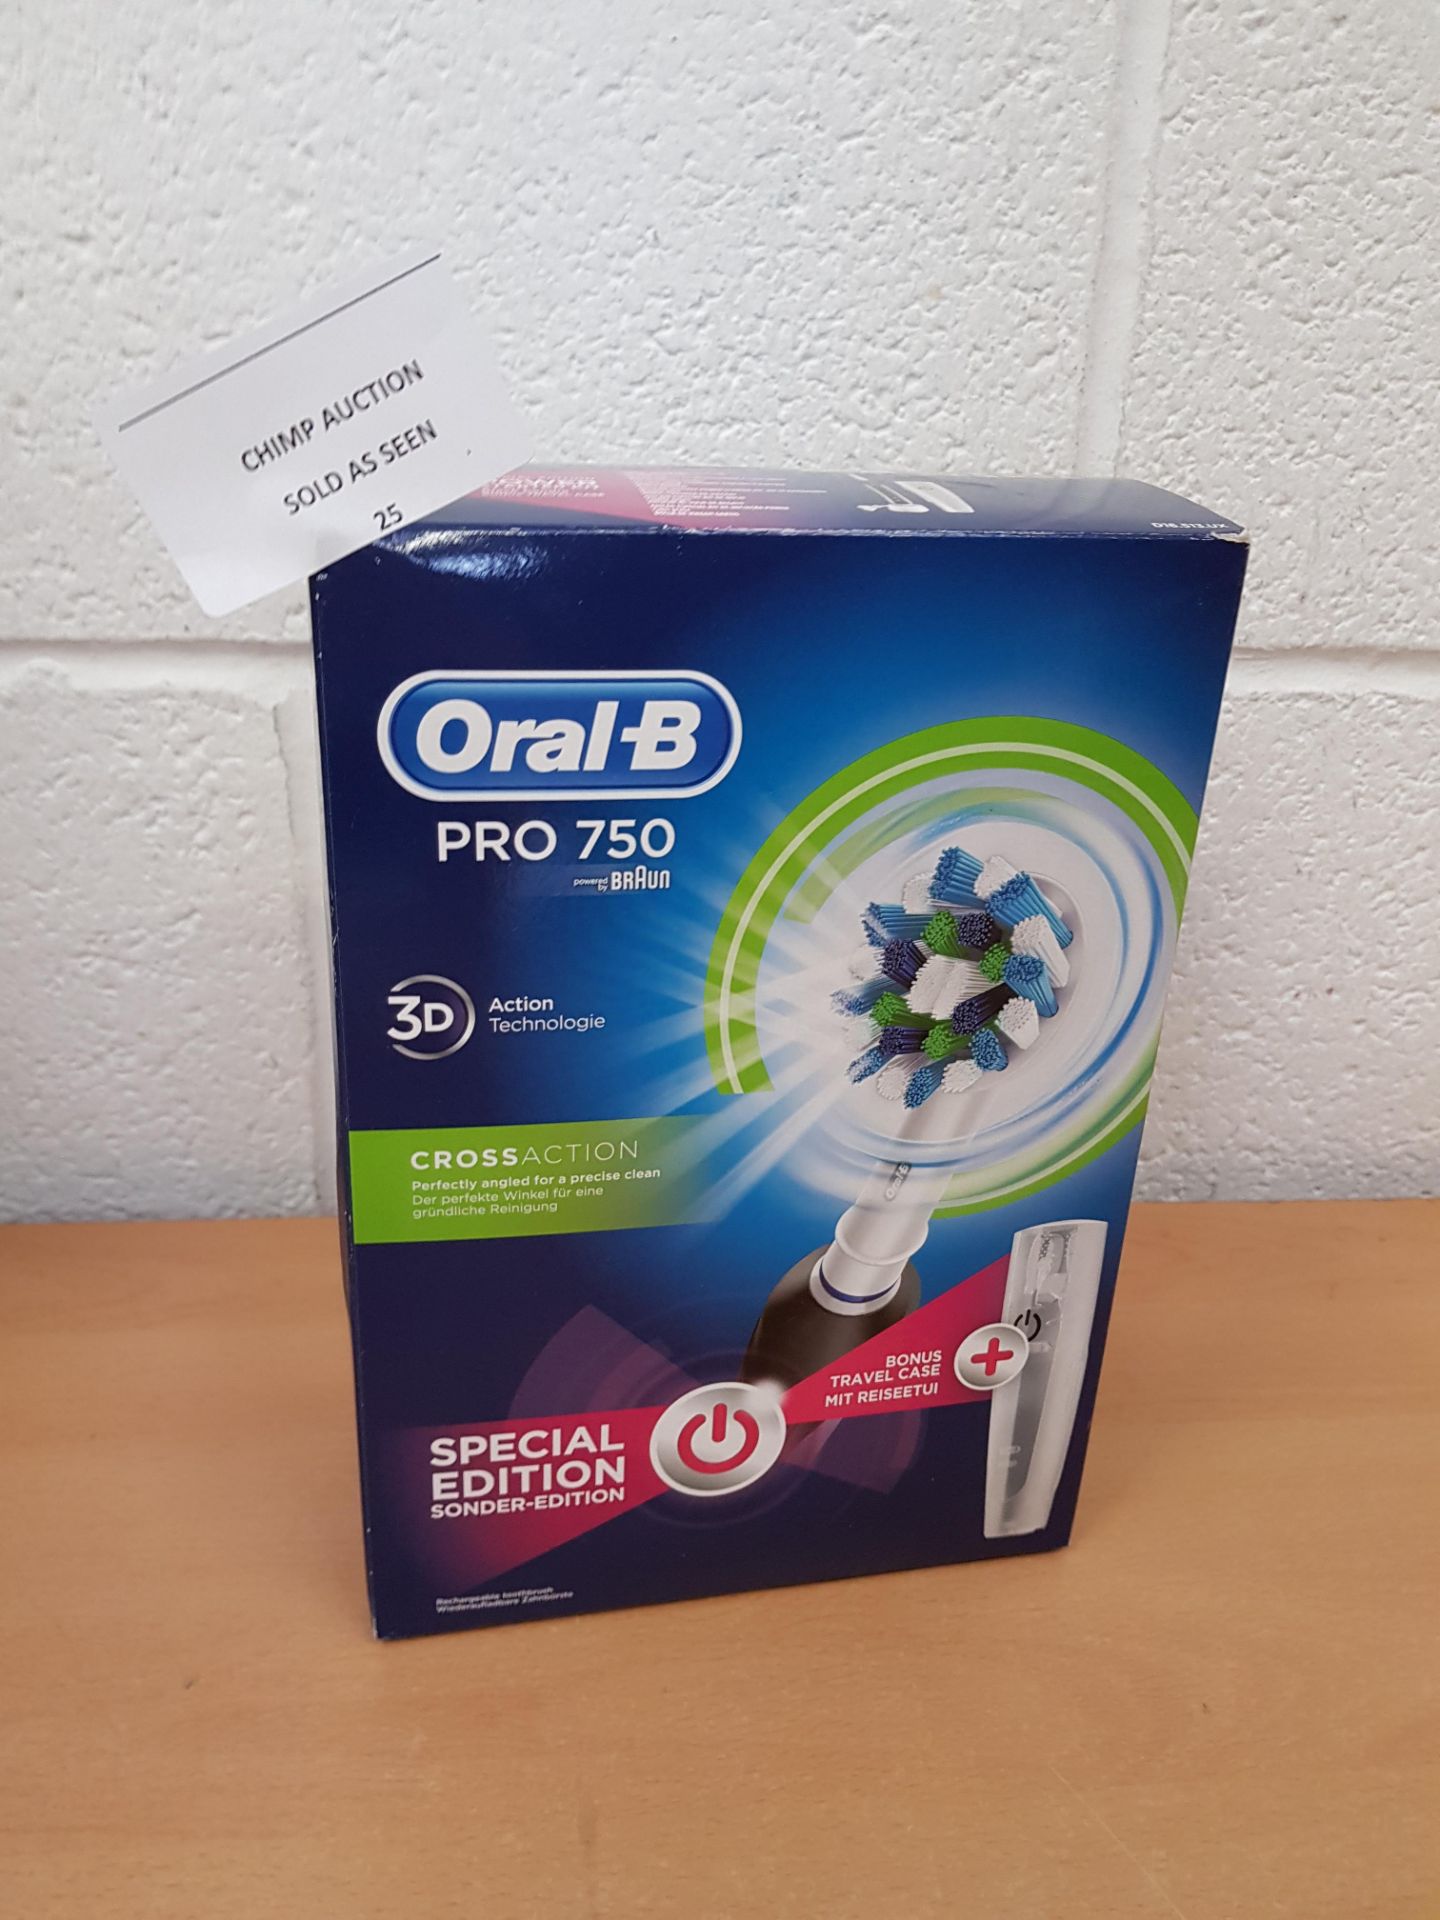 Oral-B PRO 750 3D CrossAction Limited Edition Toothbrush RRP £79.99.